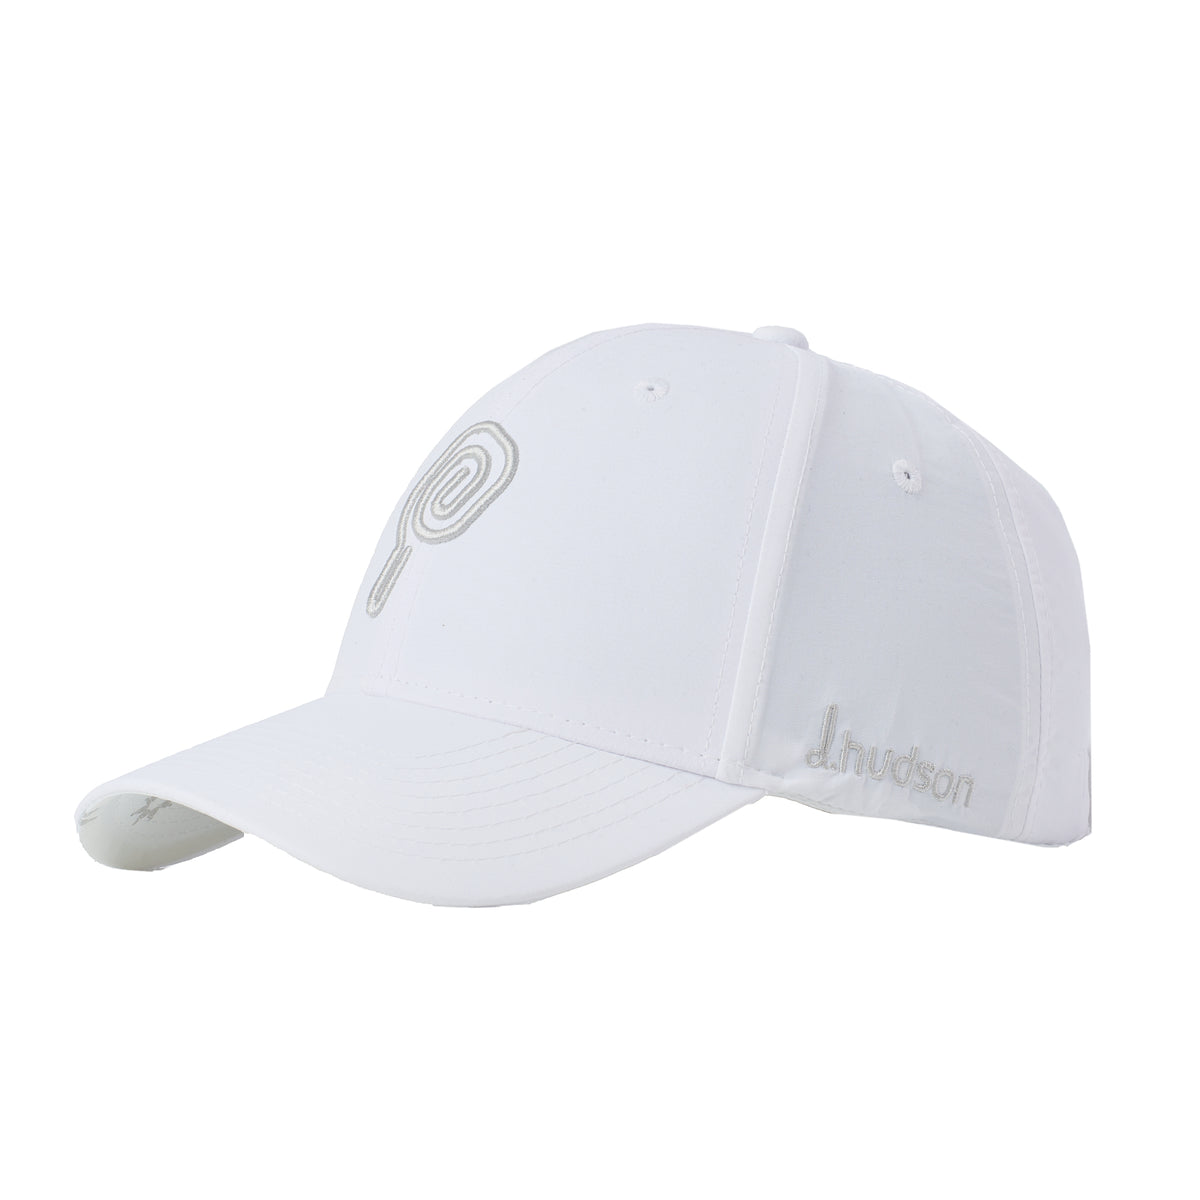 Swirlin' Paddle Ladies Fit (White/Gray)